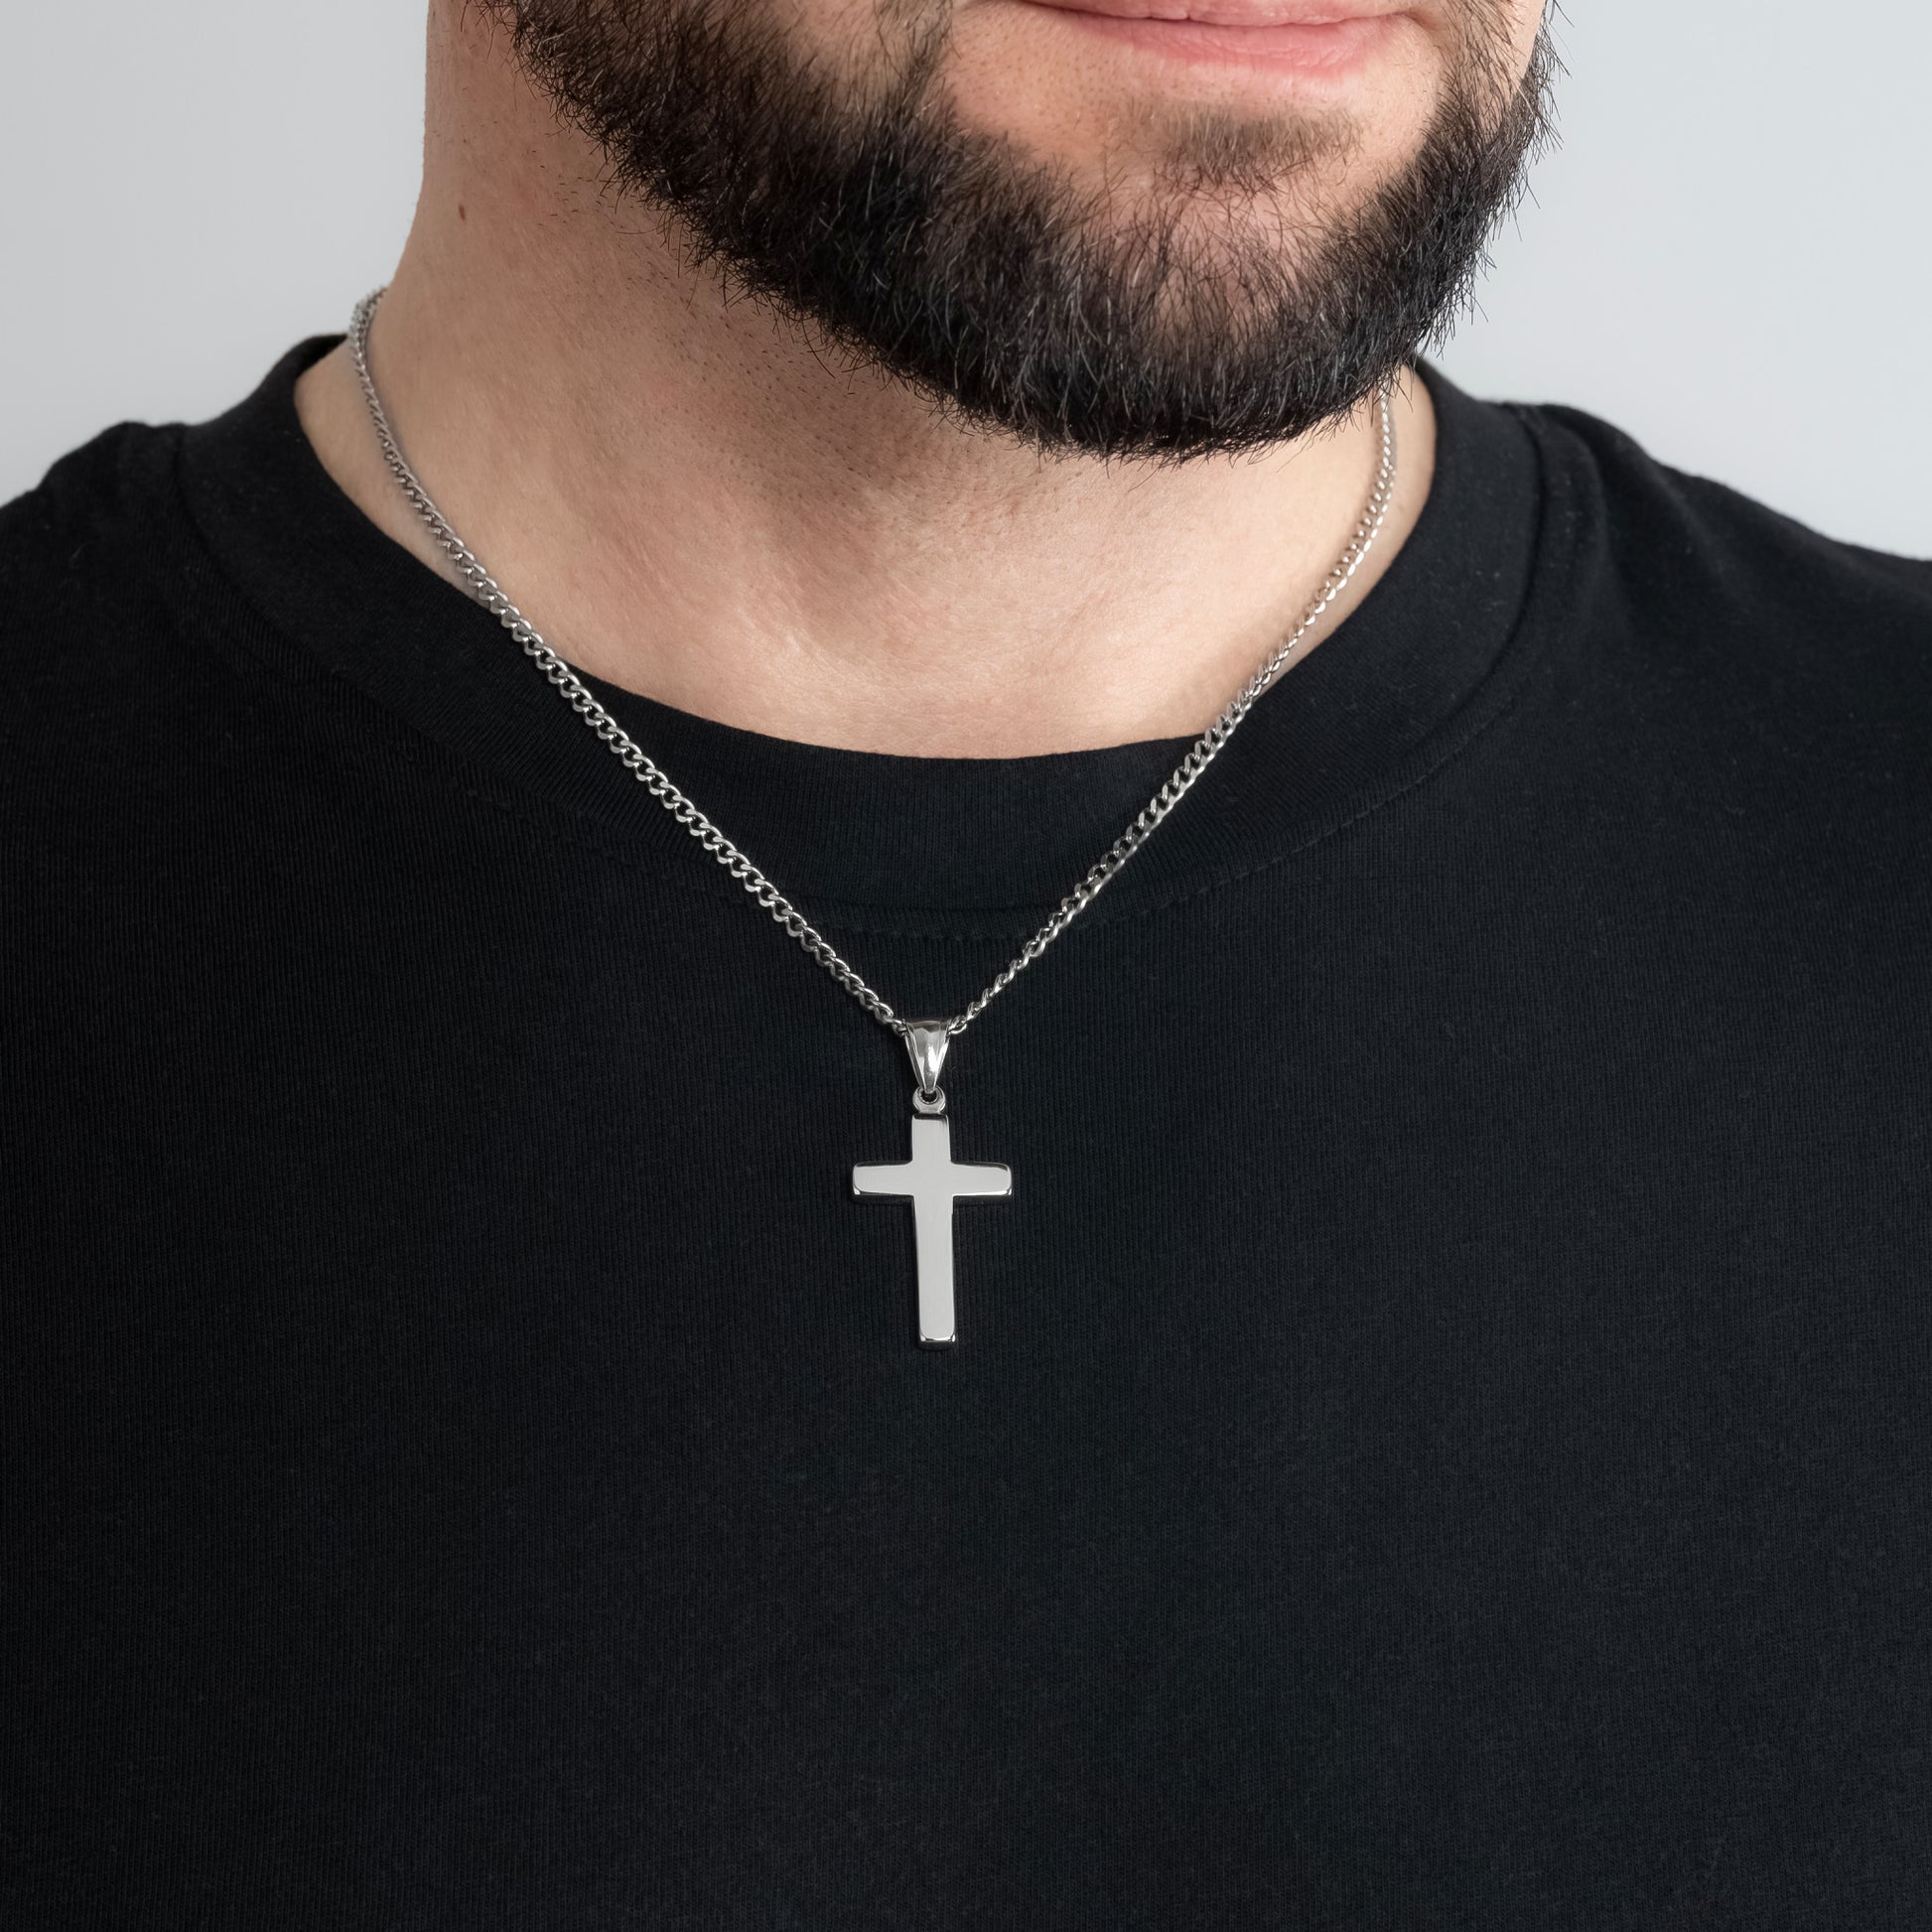 A male model in a black t-shirt wearing a Classic Cross Silver Pendant with a 3mm Silver Micro Cuban chain 22 inches. Close-up image of the waterproof, tarnish-free trending men's necklace.